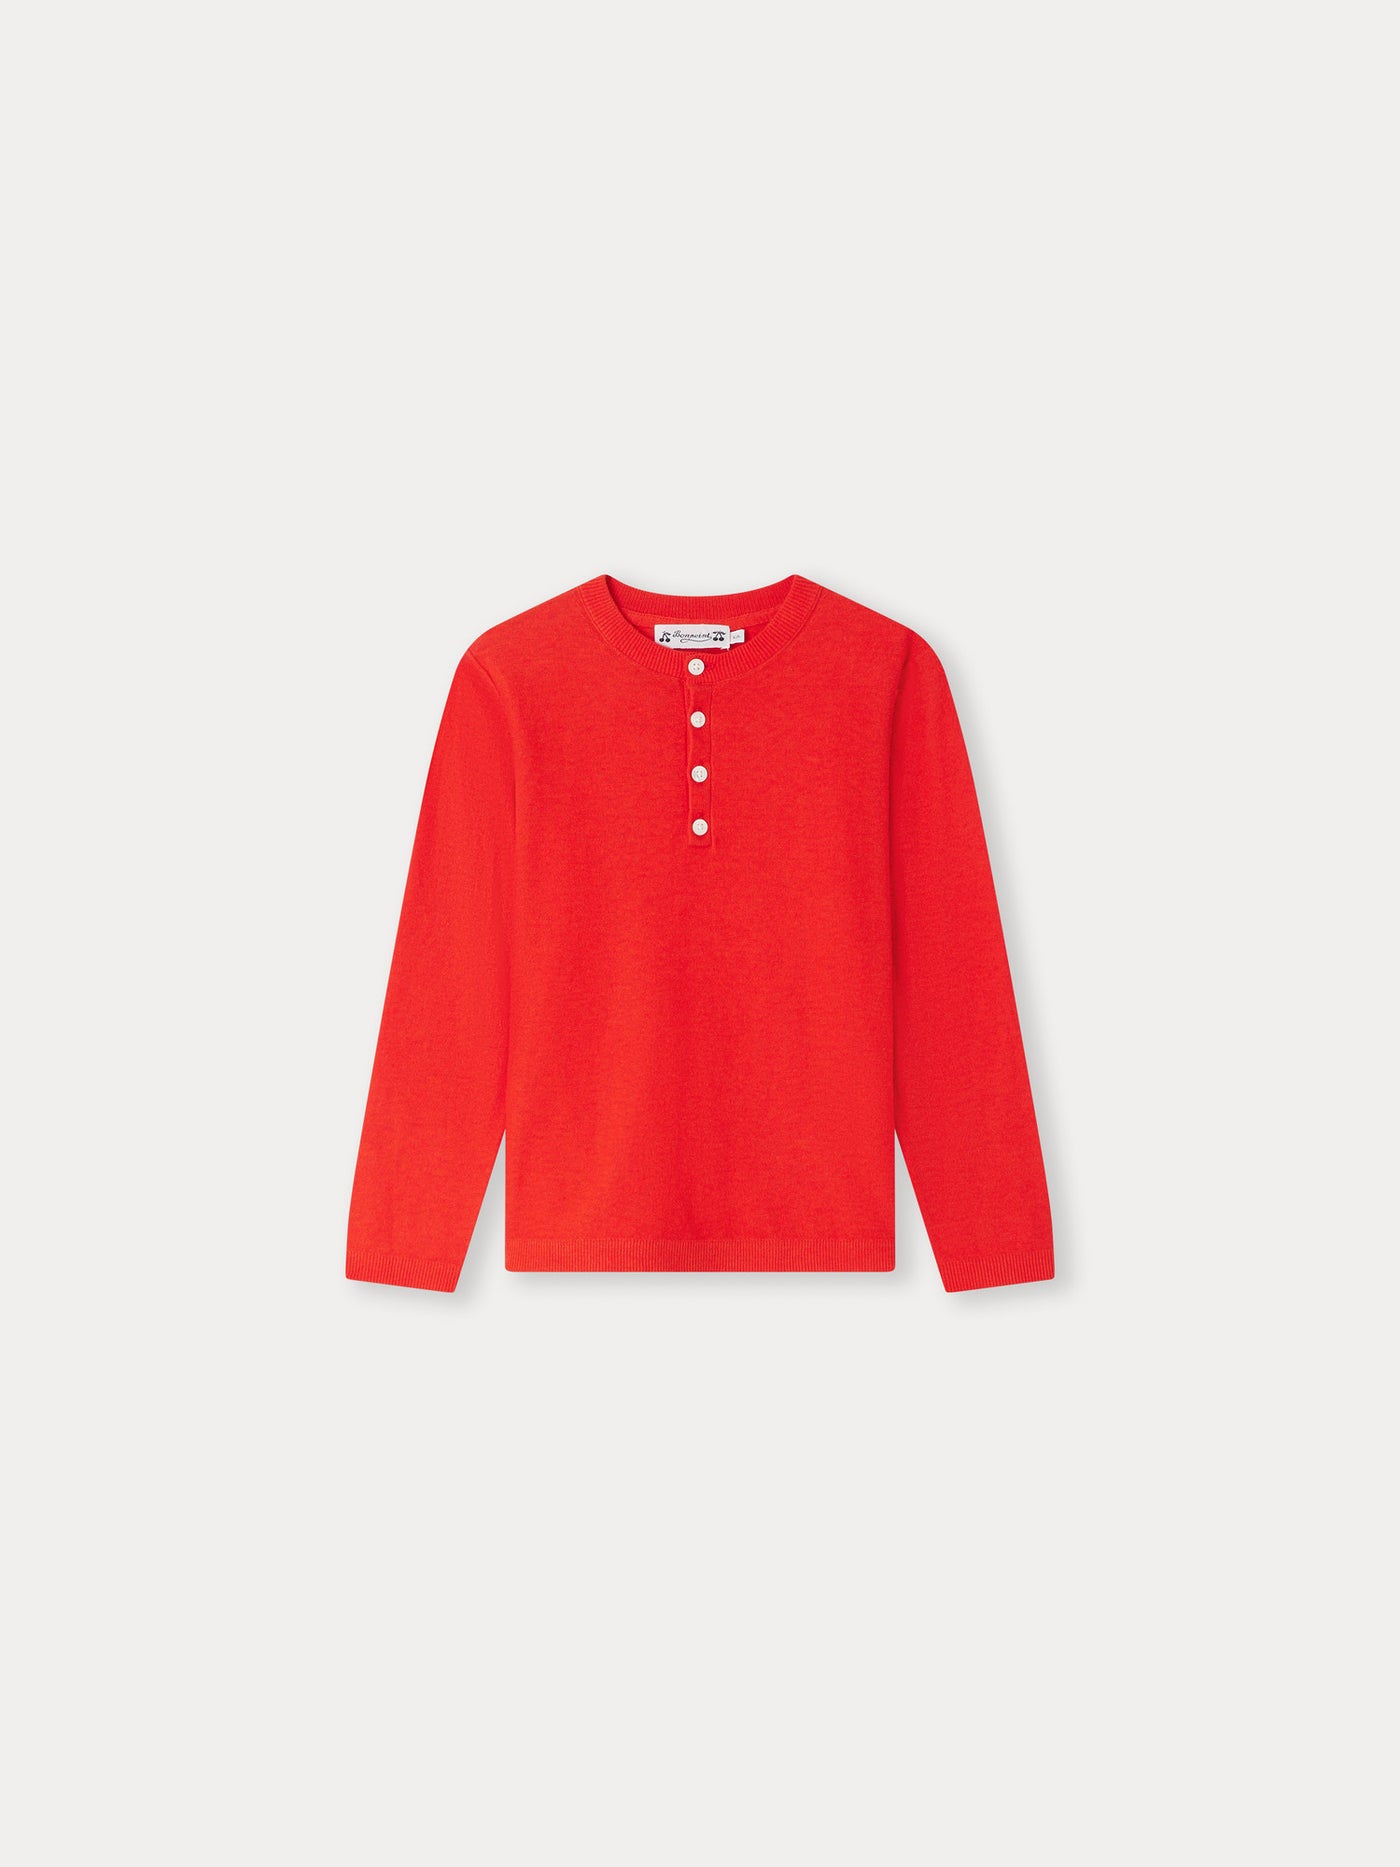 Channing Sweater poppy red